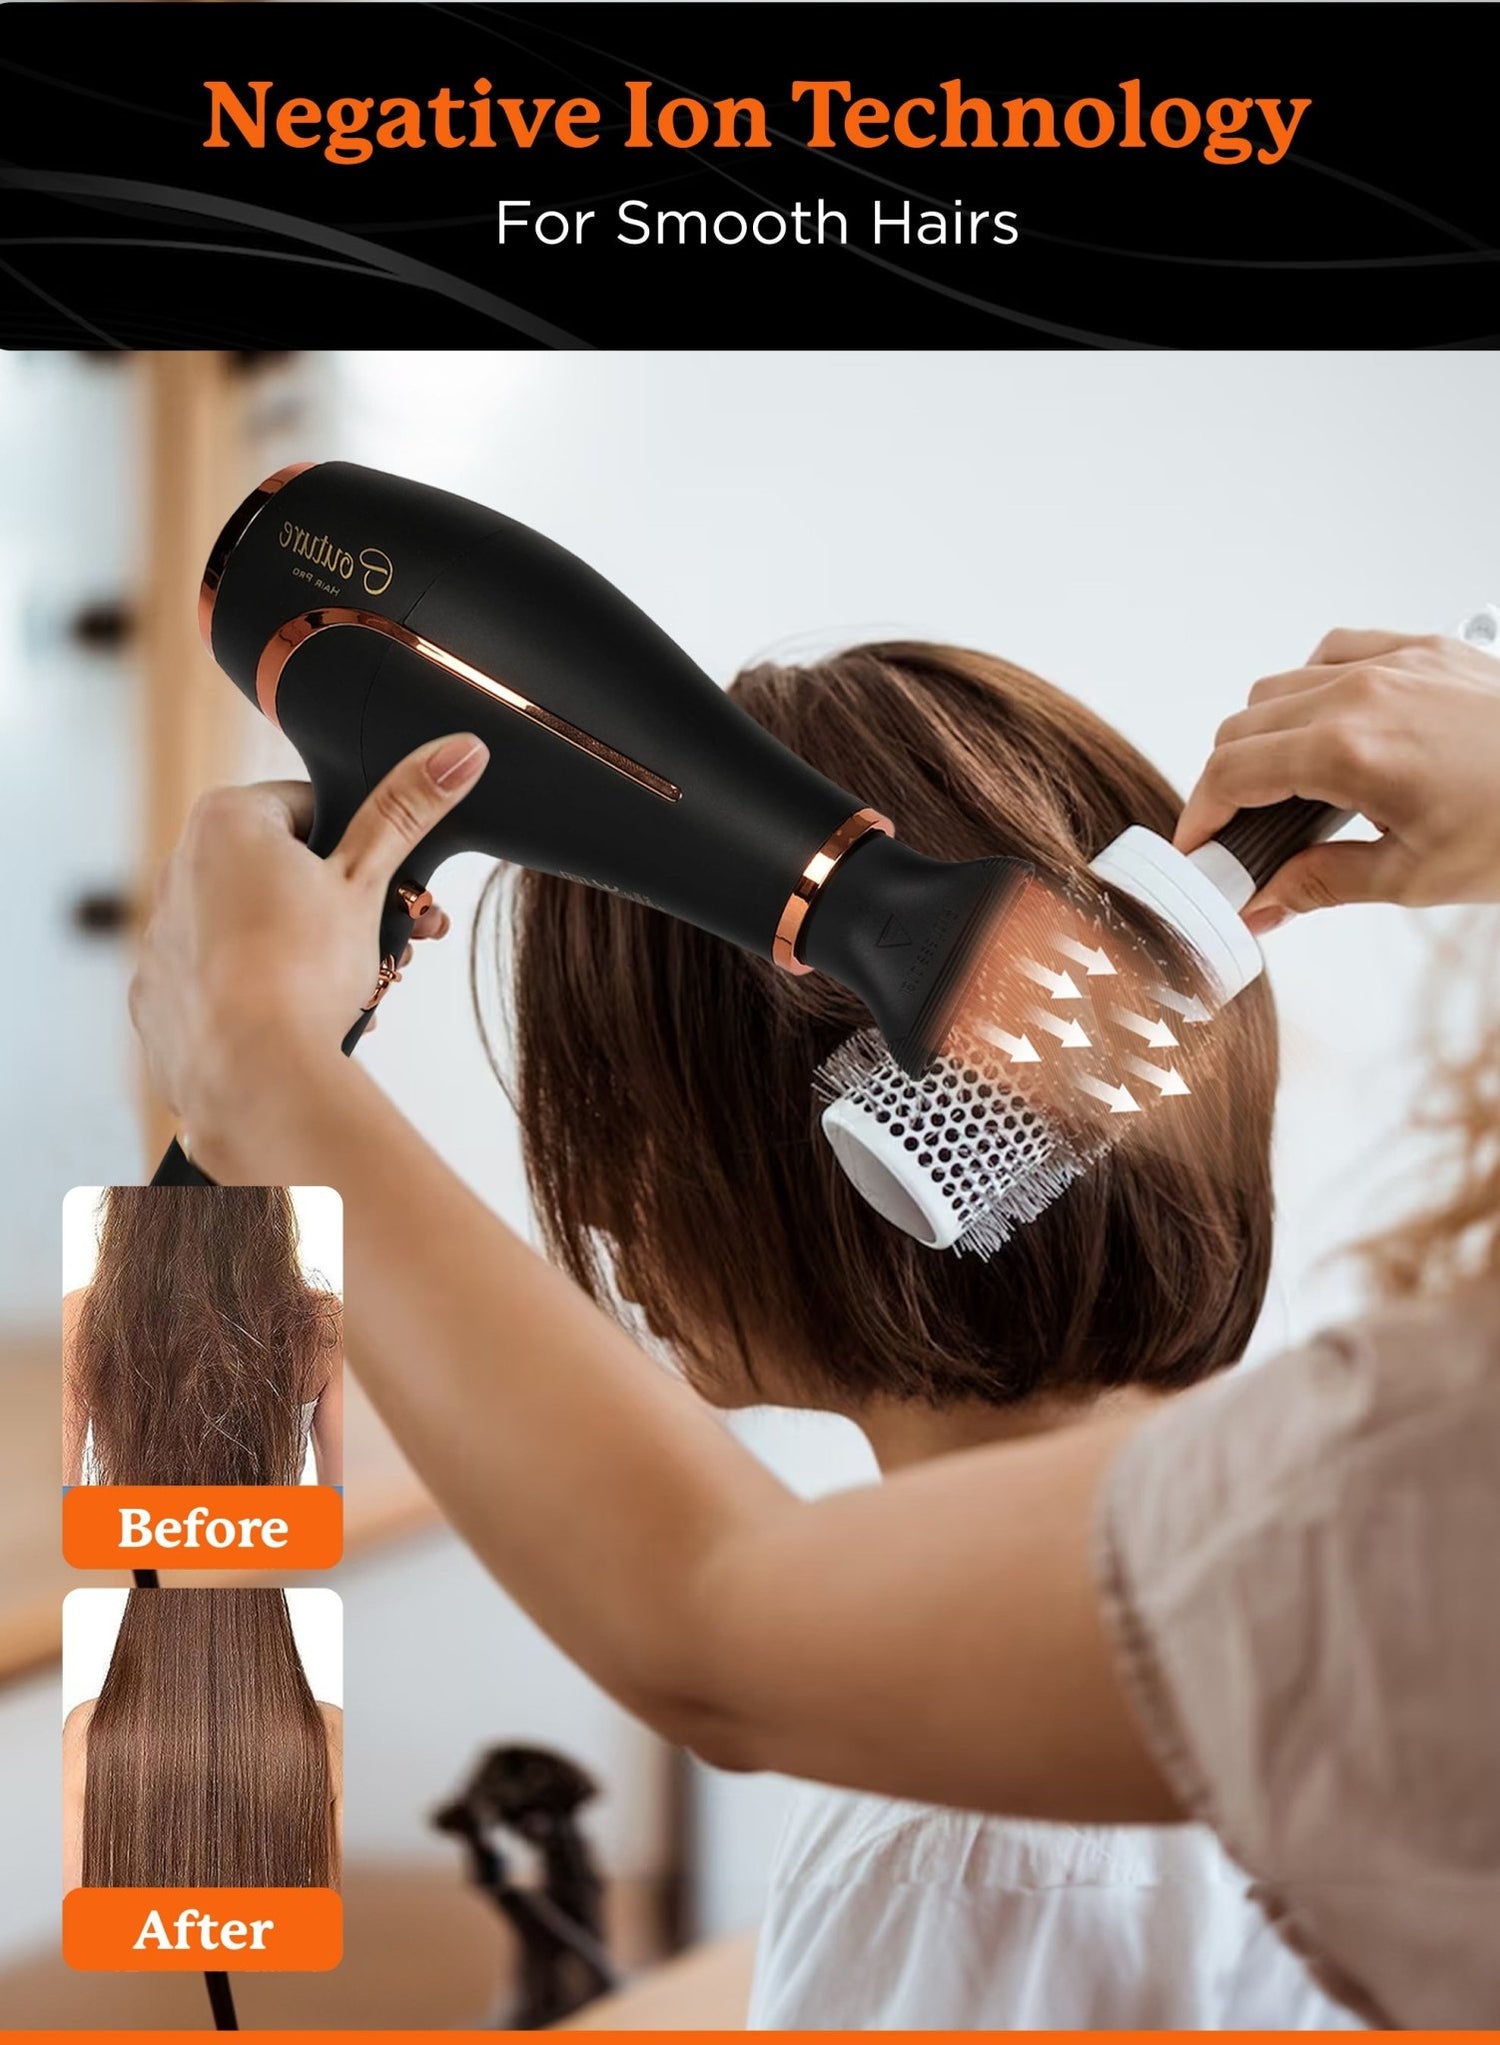 Couture Hair Pro Hair Dryer 2500 Watts with AC Motor Fast Blow Drying - Couture Hair Pro